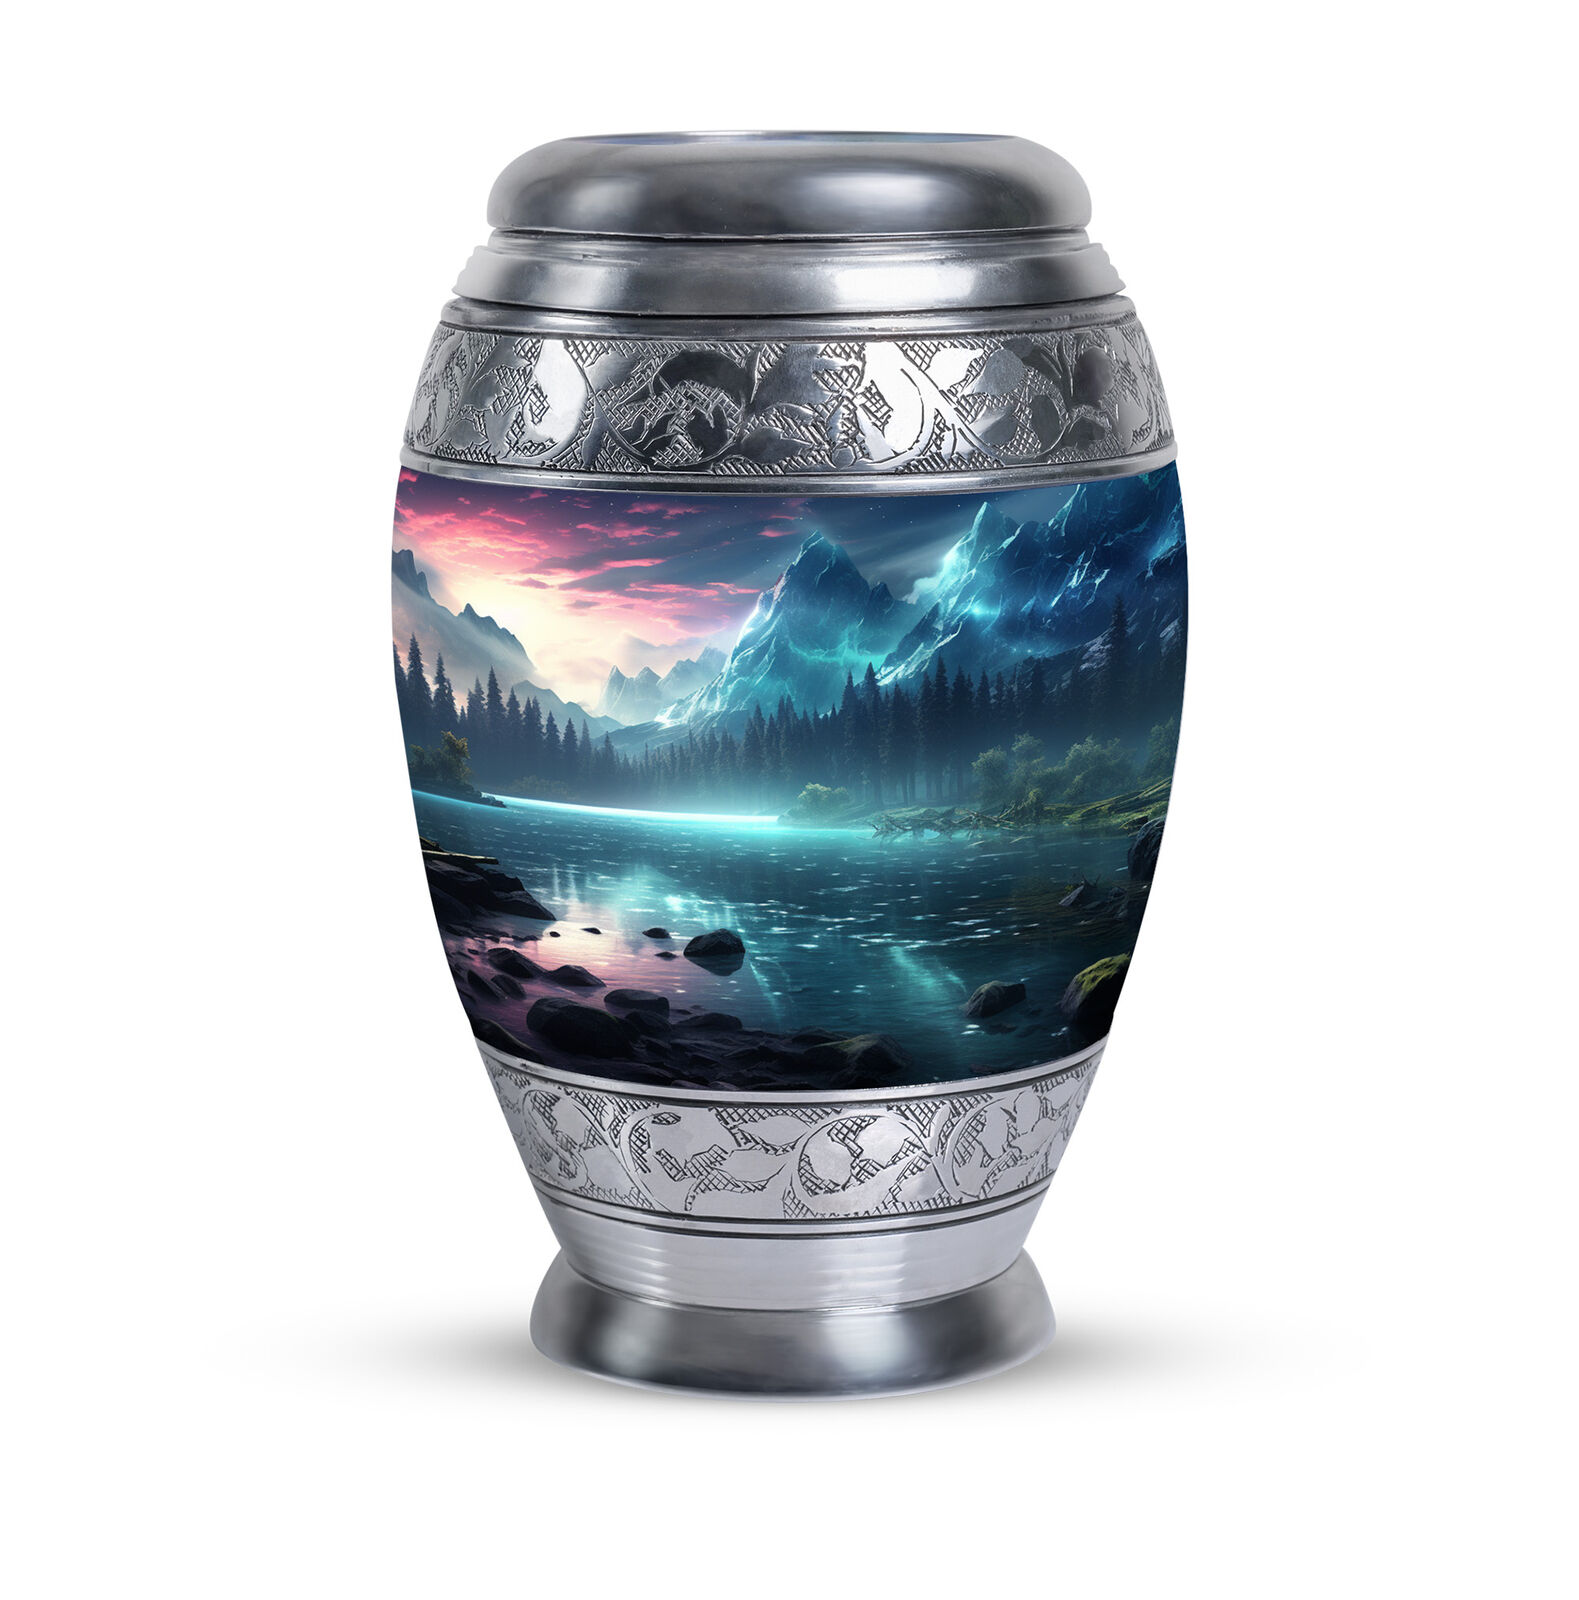 Mystic River Valley Cremation Urn Human Ashes Large Urns For Adult Male